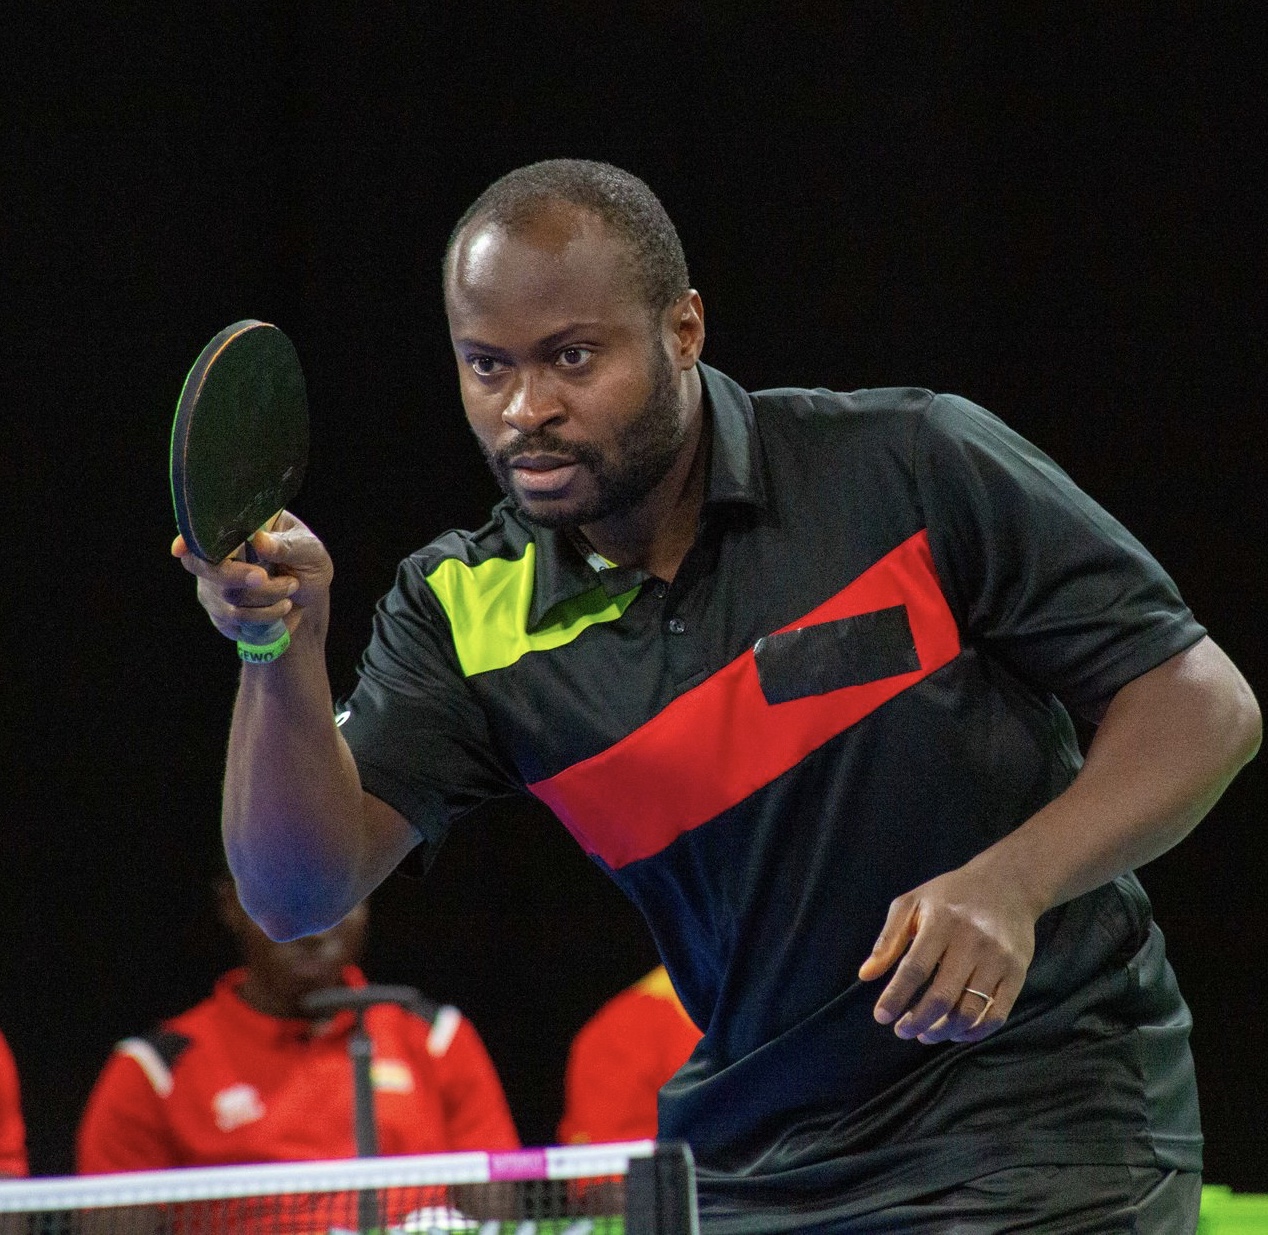 2022 Commonwealth Games: Nigeria Outclass Ghana To Record Back-To-Back Wins In Men’s Table Tennis